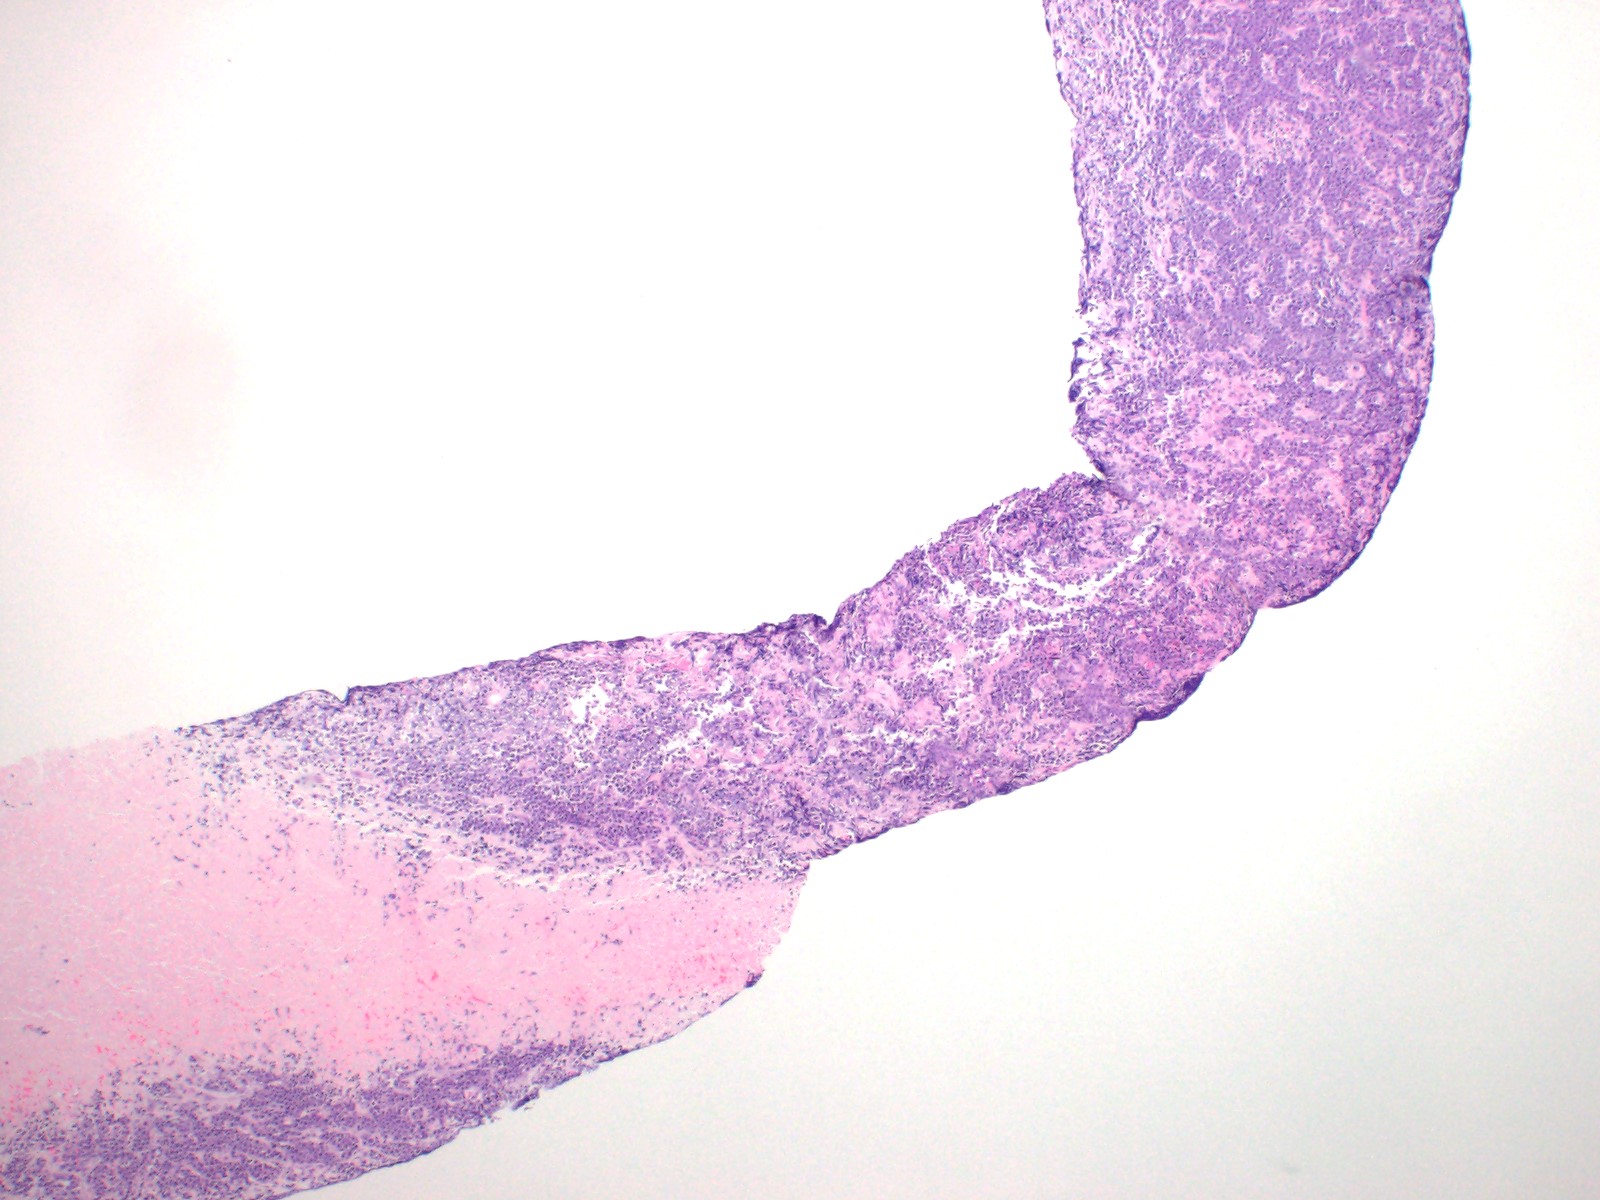 Diffuse lymph node infiltration by lymphoma cells